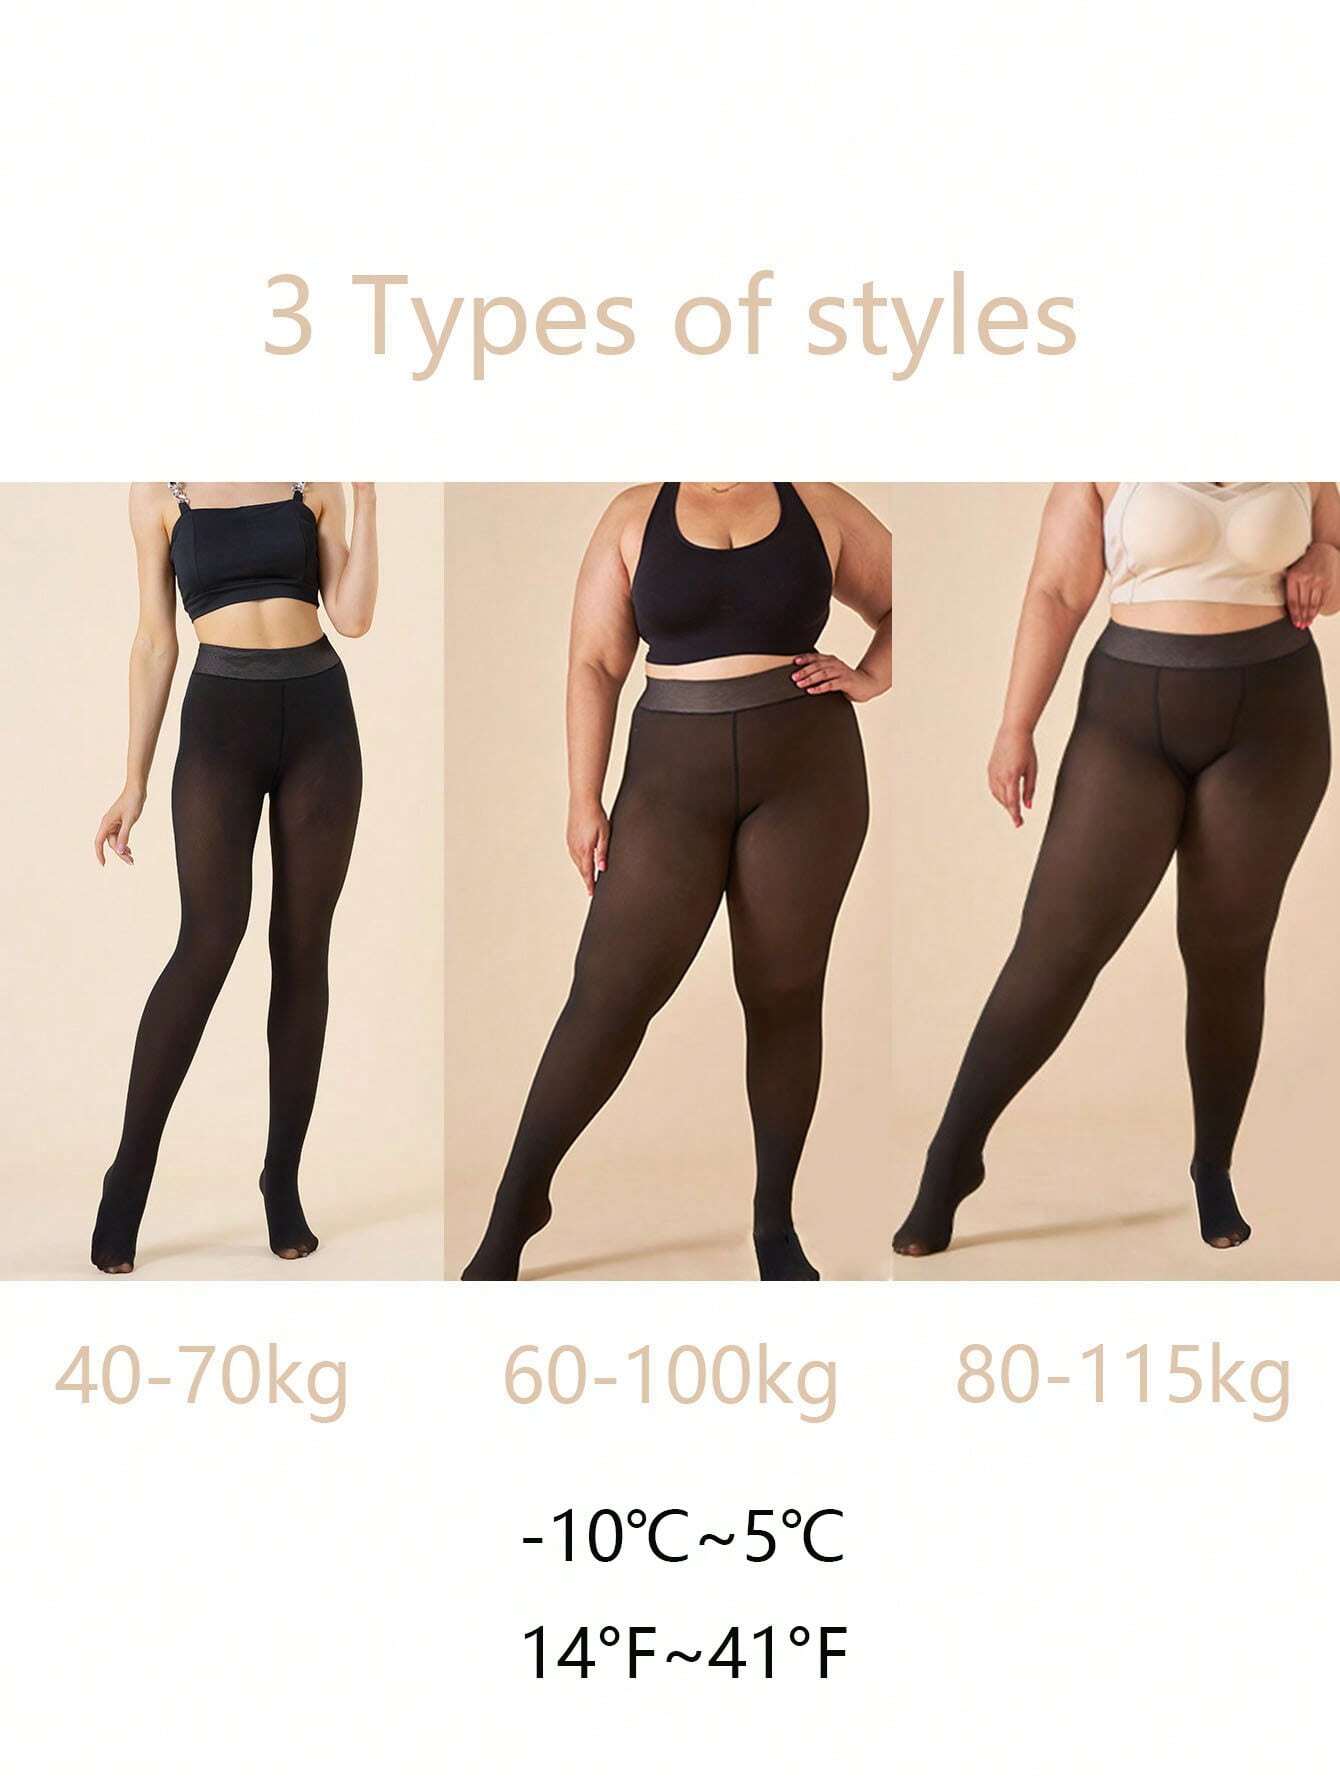 300g Women's Plus Size Thermal Tights